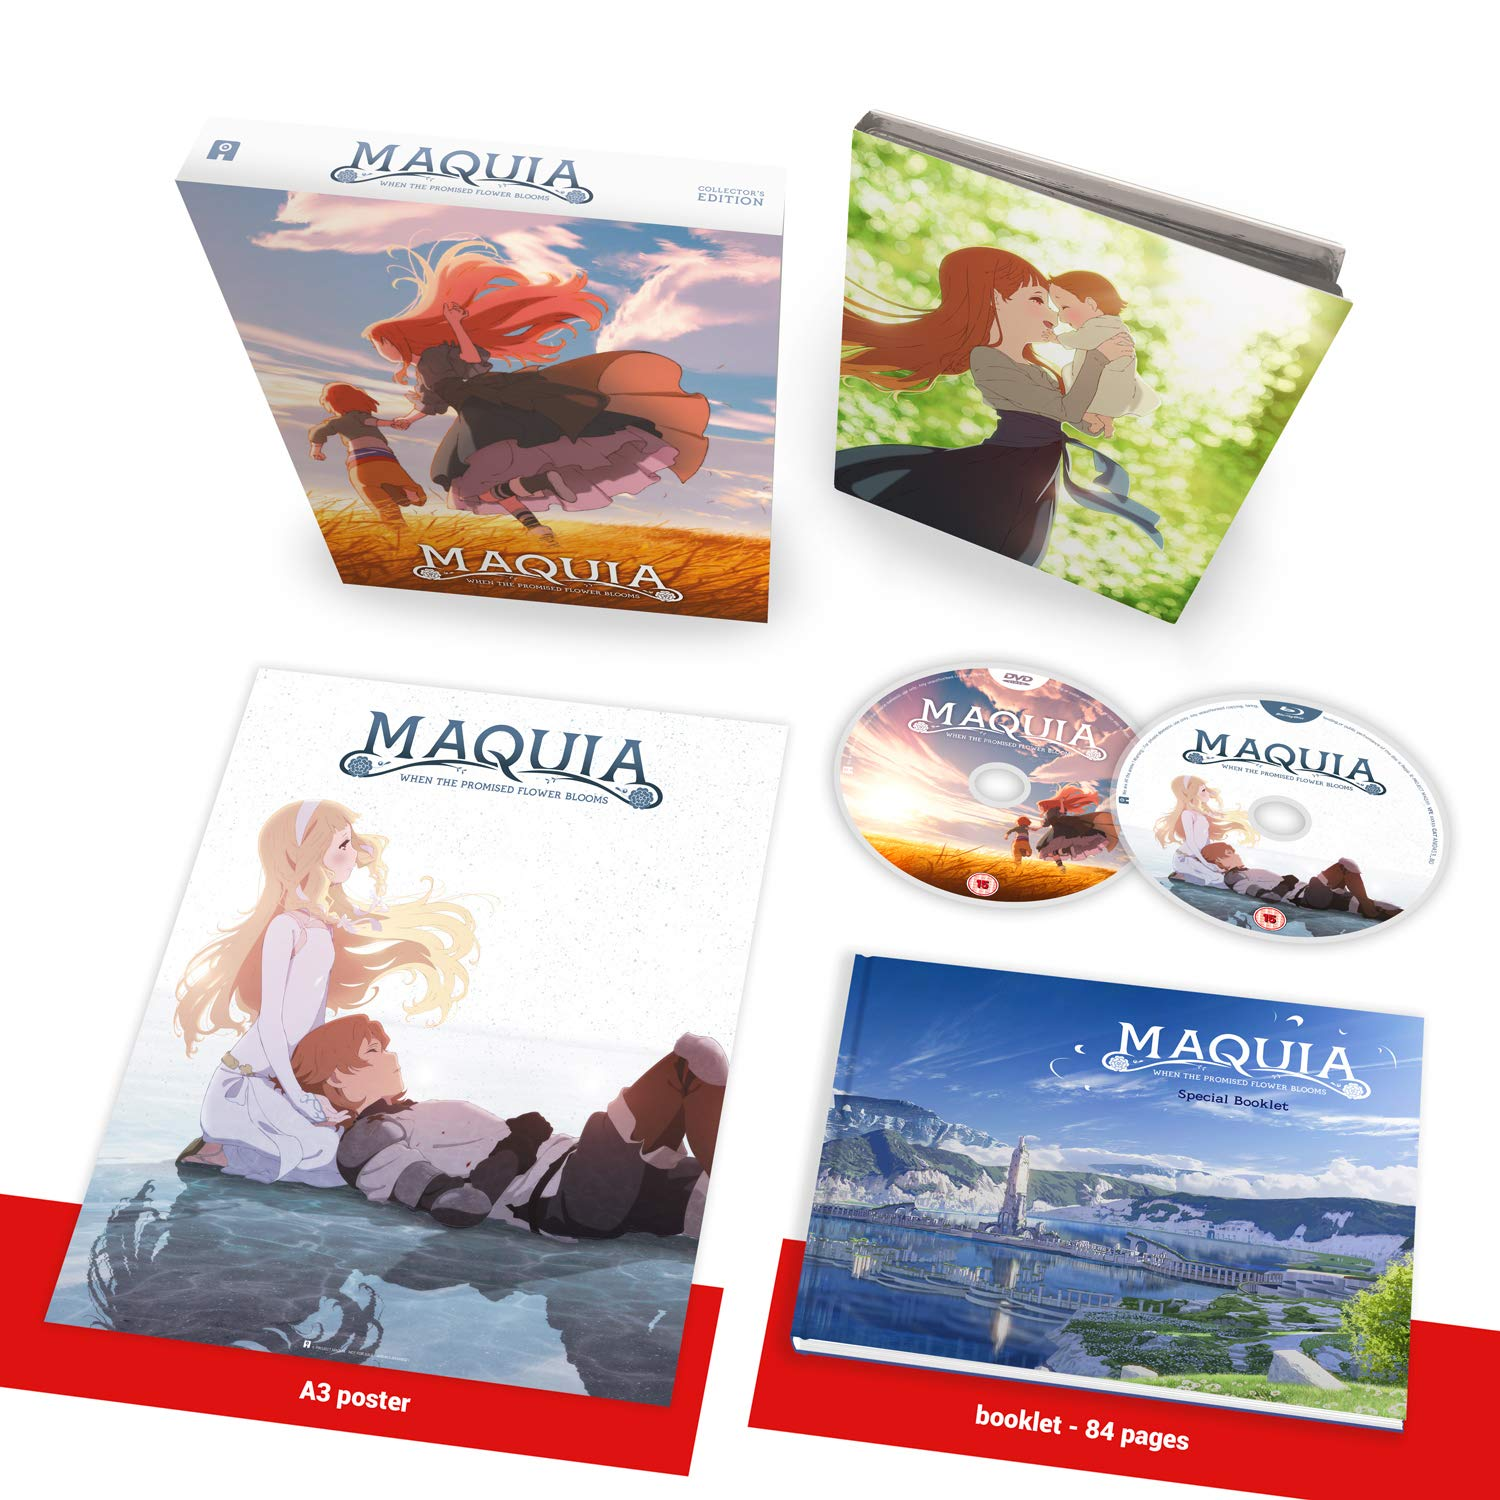 The Maquia Collector's Edition, featuring a digipack, an A3 replication of the theatrical poster, and a hardcover art book, contained in a rigid box.